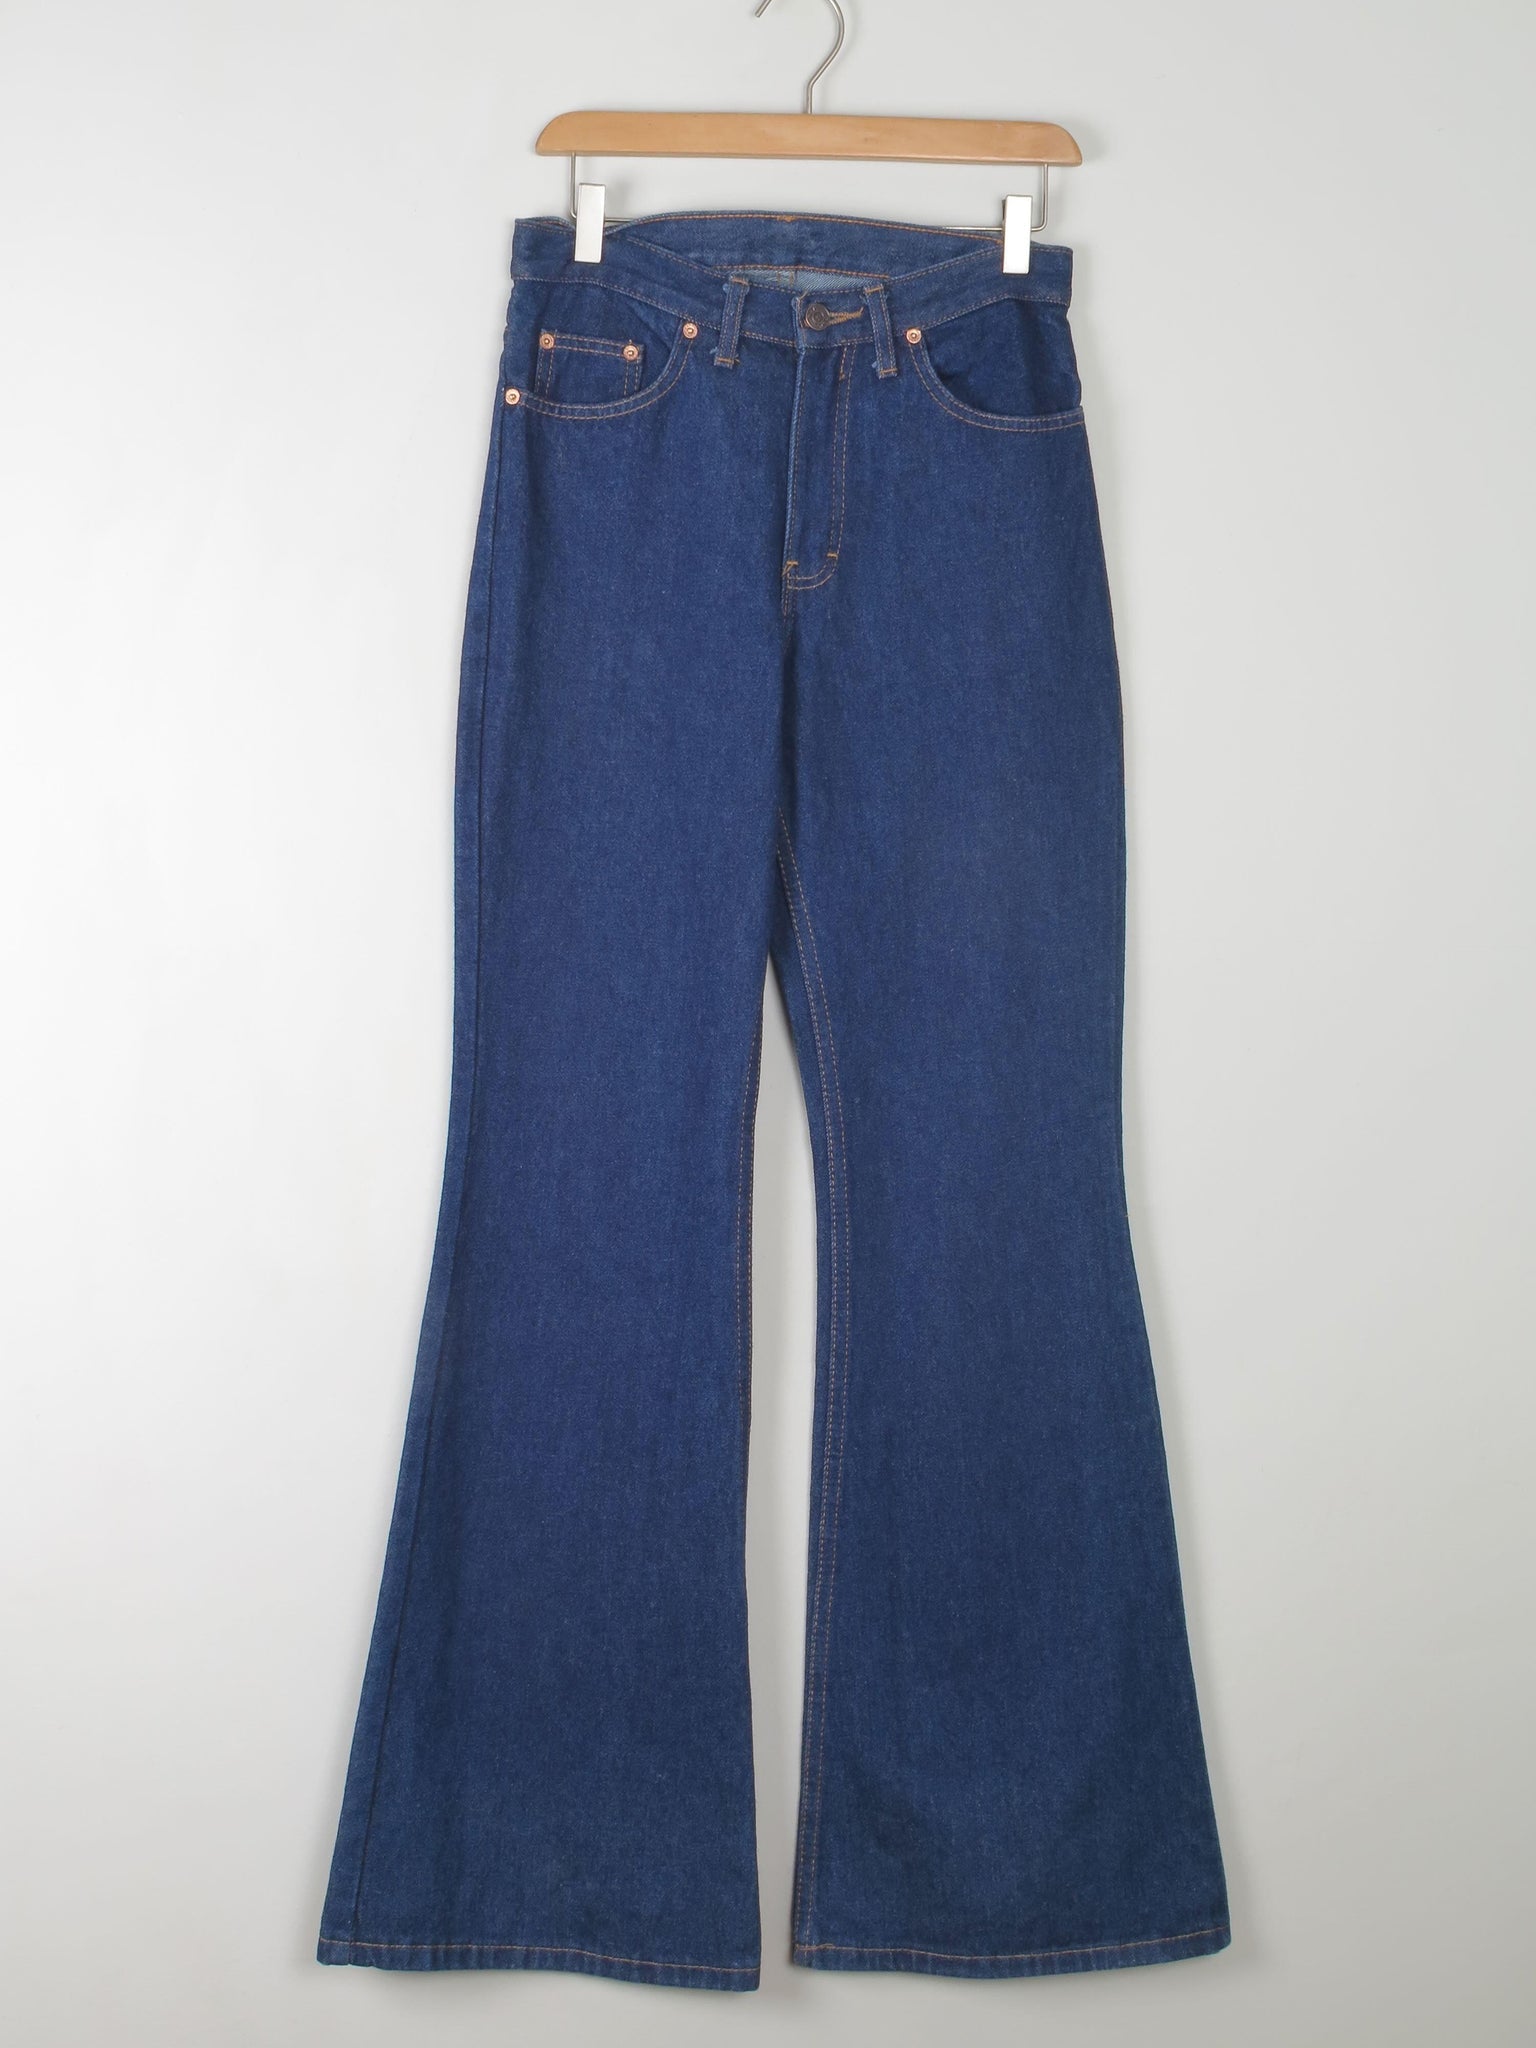 Vintage Style 90s Flared Bell Bottoms Pop Jeans 28"W /33 L - The Harlequin